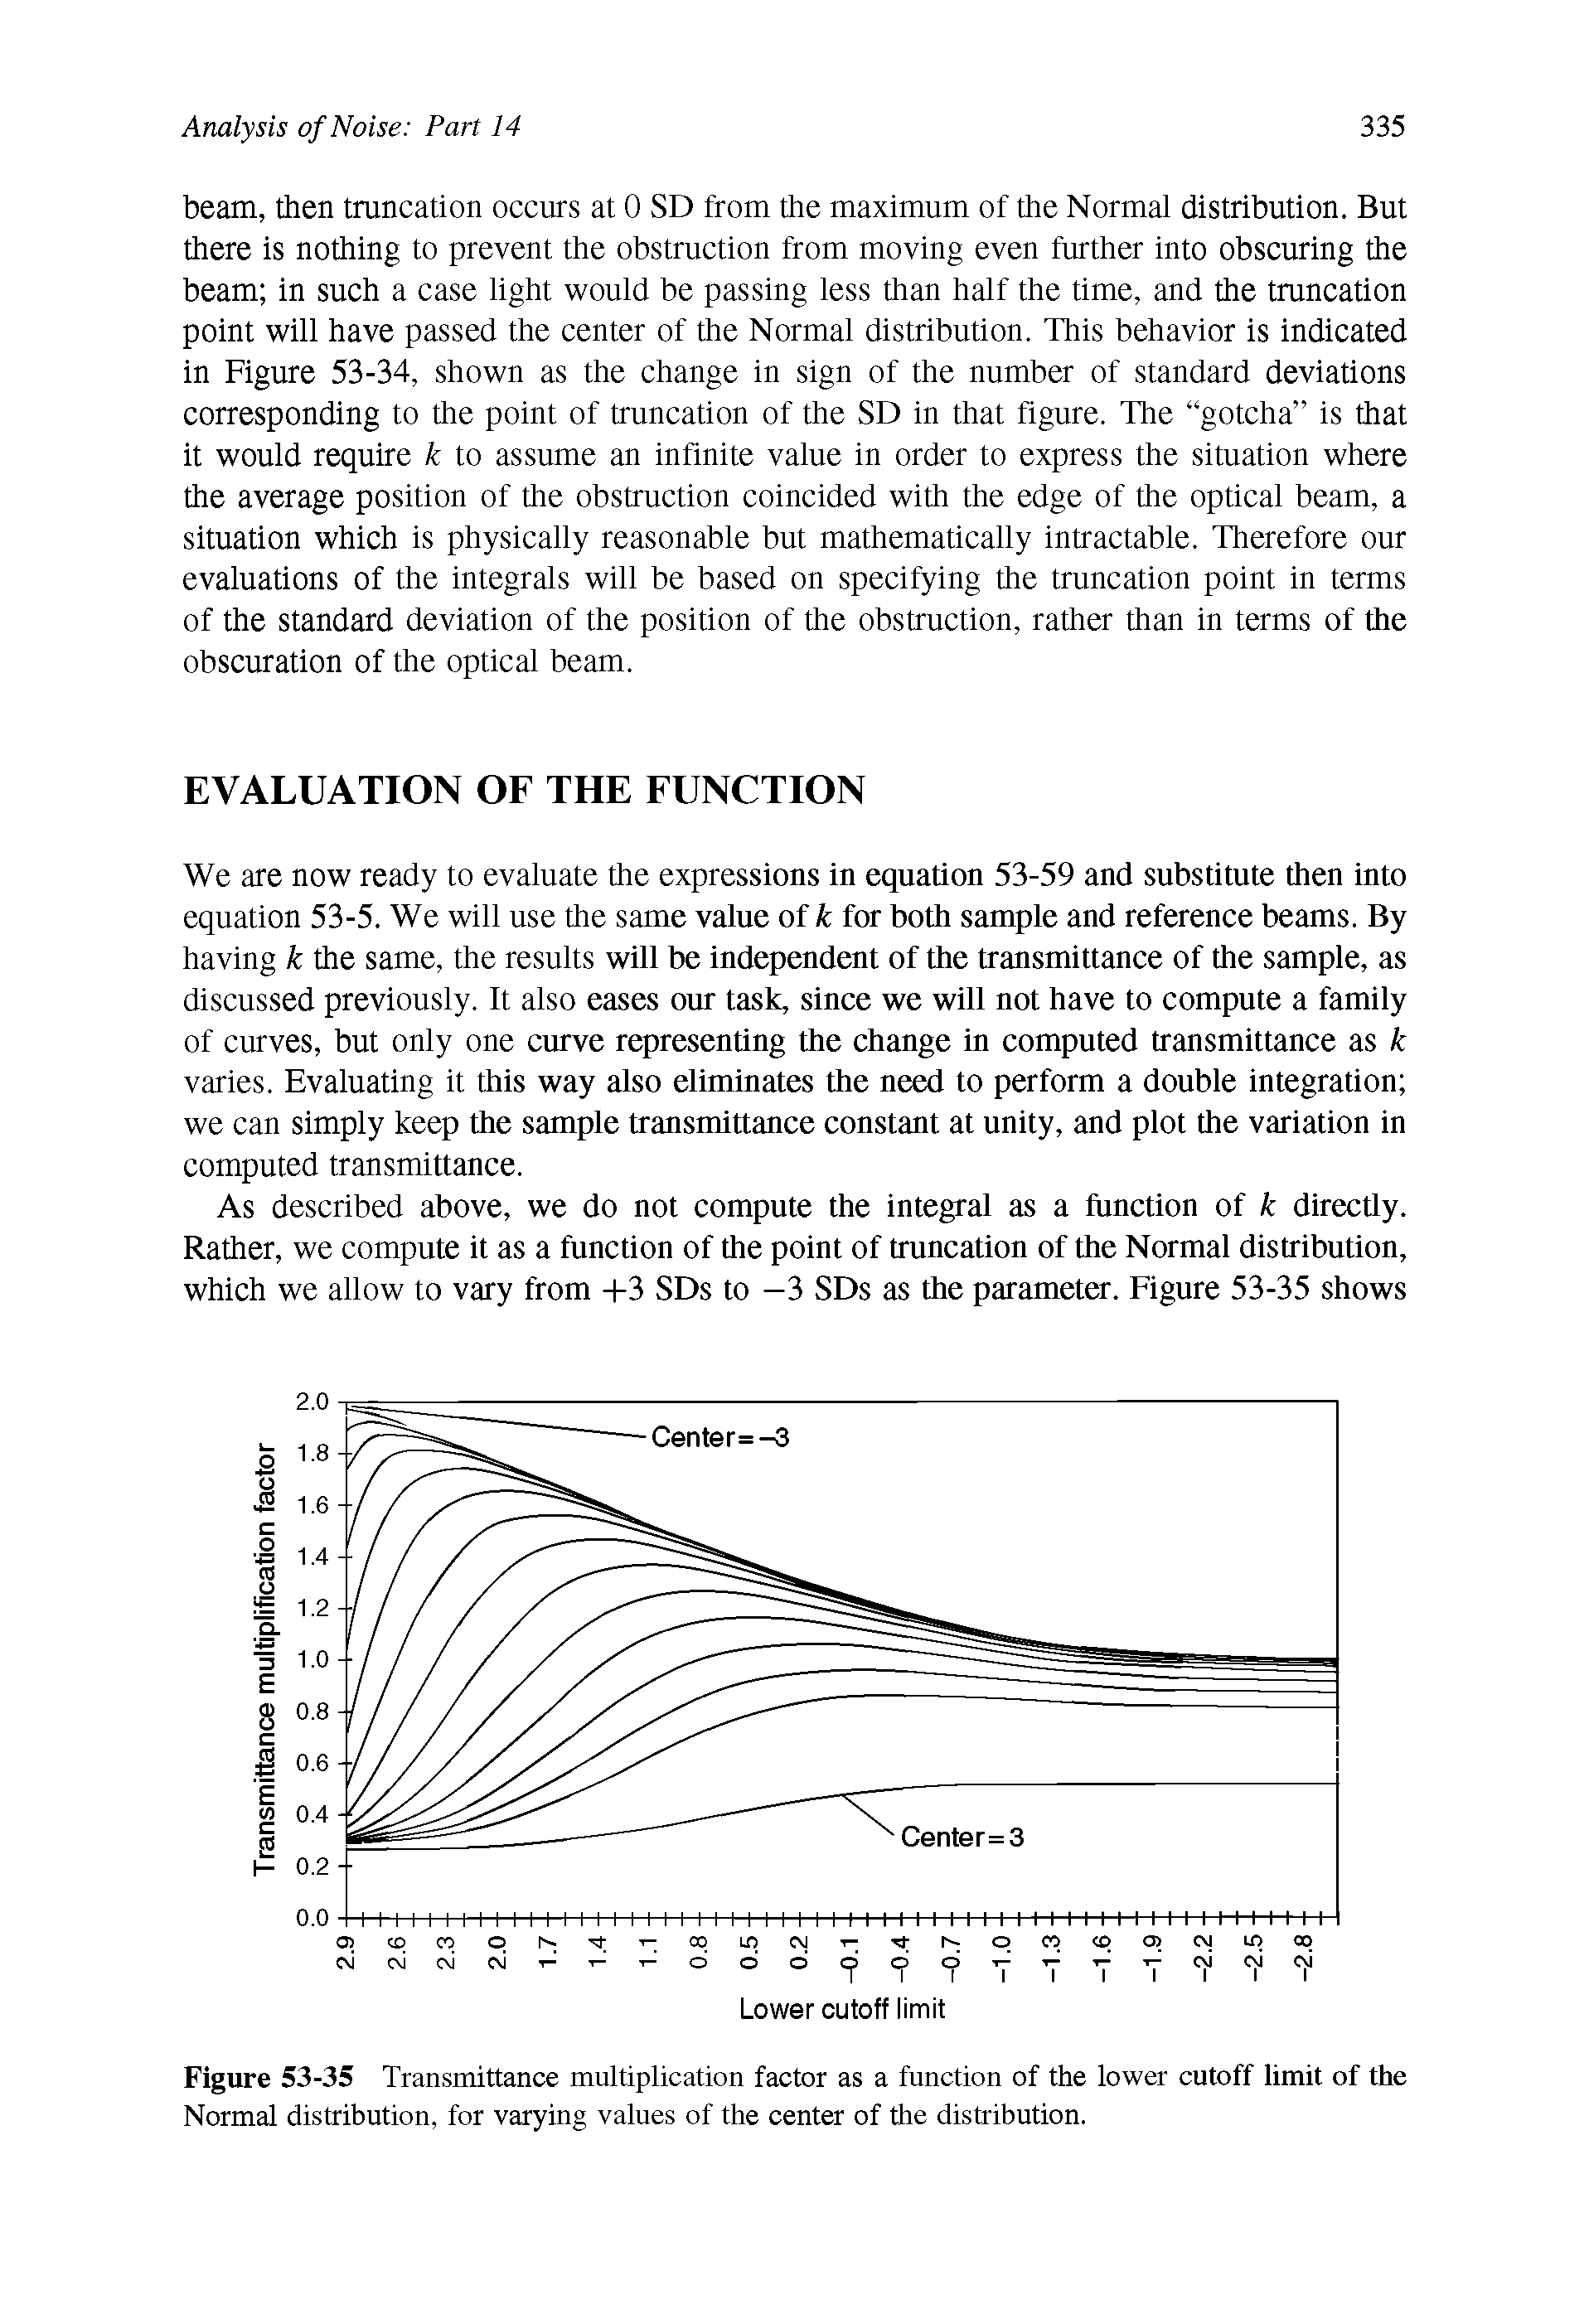 Figure 53-35 Transmittance multiplication factor as a function of the lower cutoff limit of the Normal distribution, for varying values of the center of the distribution.